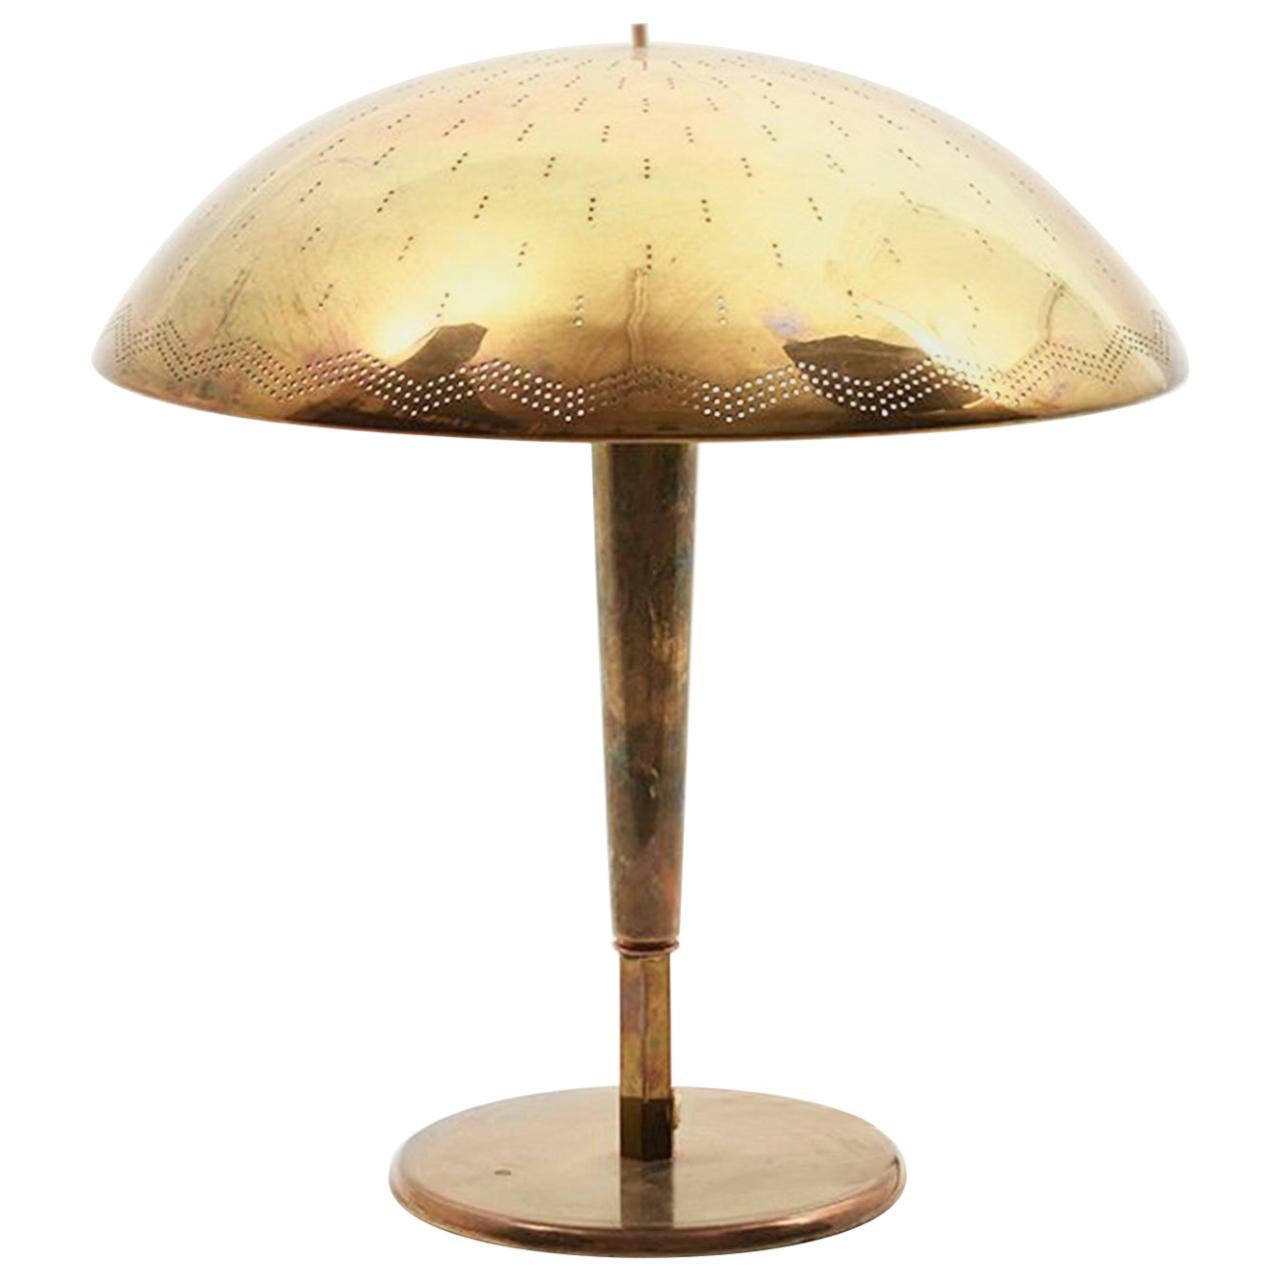 Paavo Tynell Table Lamp Model “Umbrella” Manufactured by Taito Oy Finland, 1940 For Sale